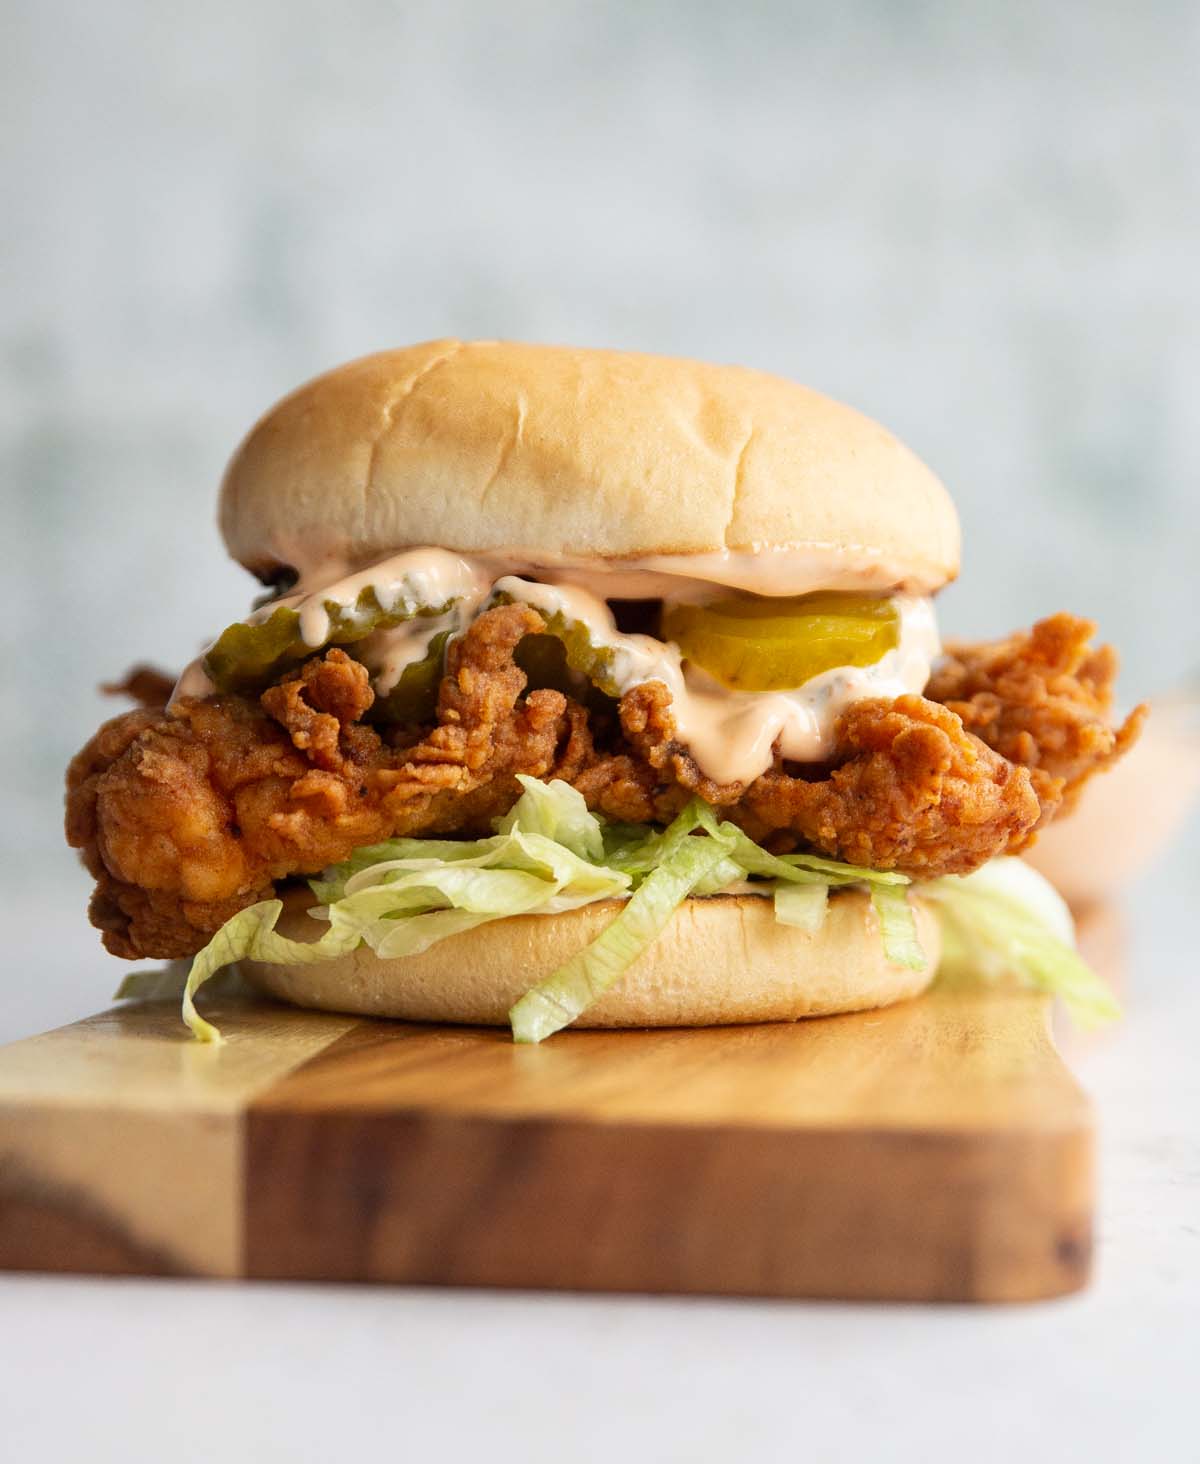 How Many Calories in a Fried Chicken Sandwich 